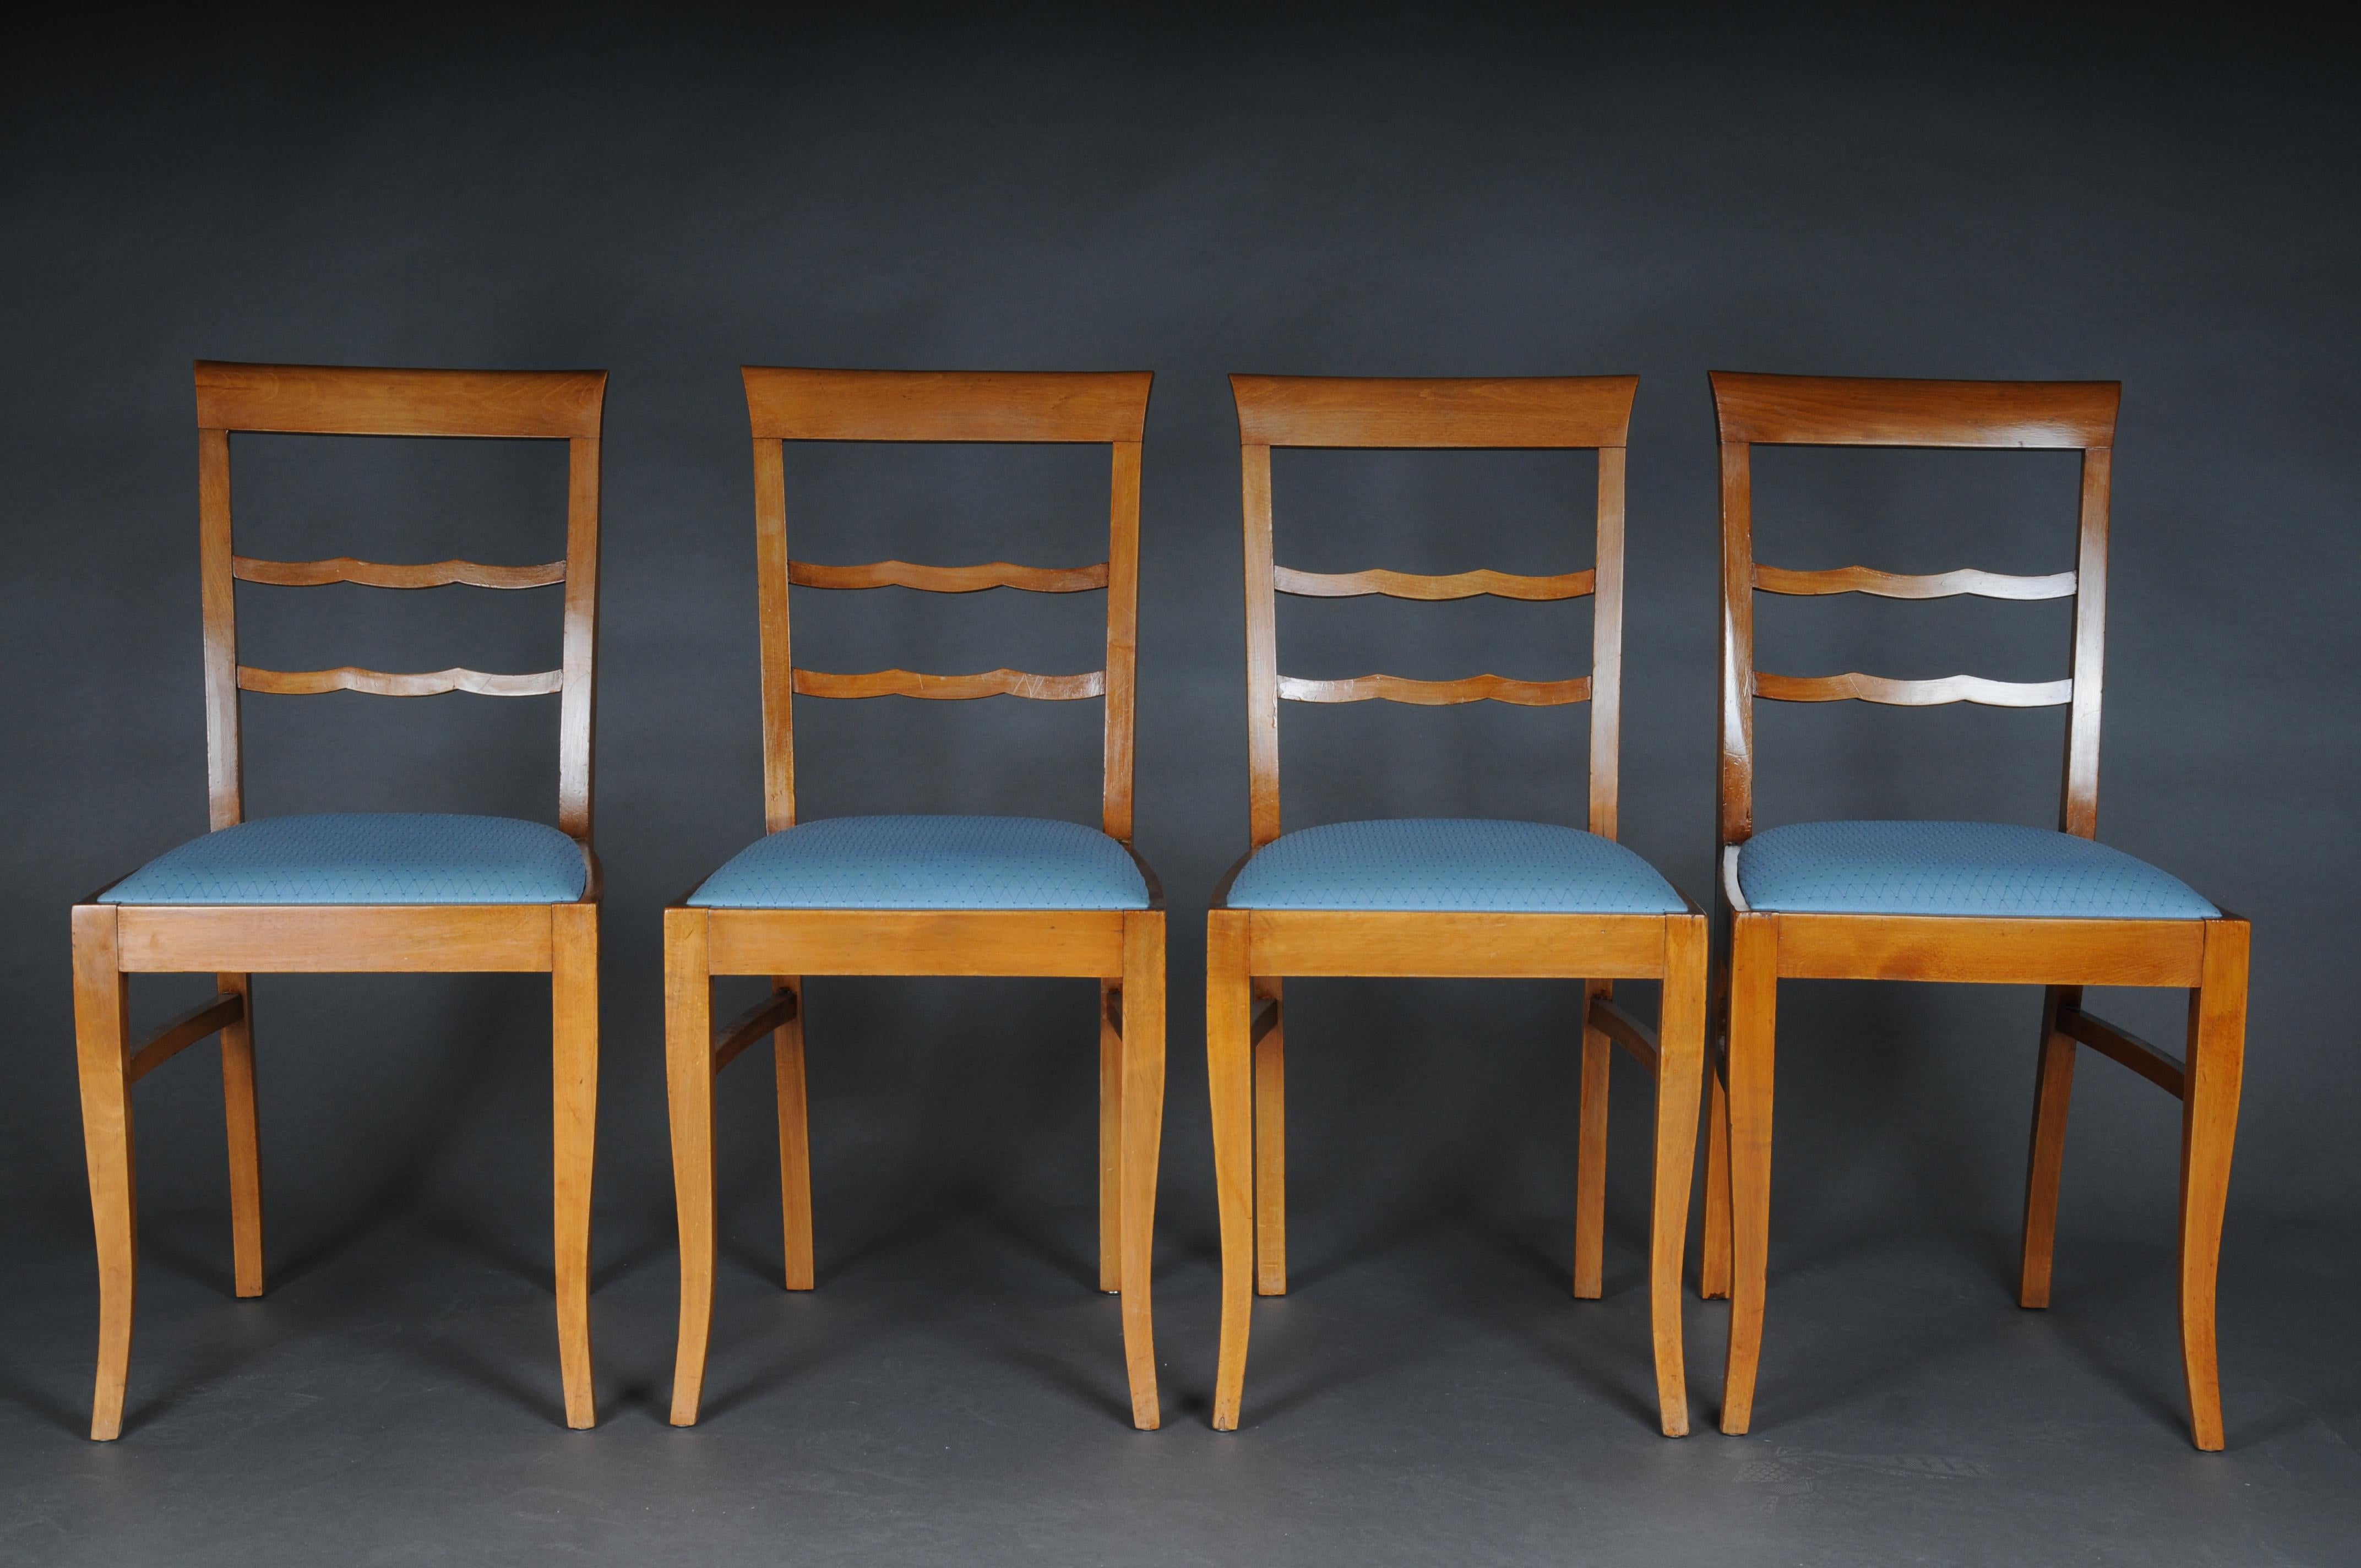 20th century set of 4 Biedermeier/Art Deco chairs, birch

Slightly arched backrest with straight top and 2 middle bridge. Newly upholstered seat and covered with a high quality fabric. These chairs have been completely restored by an experienced